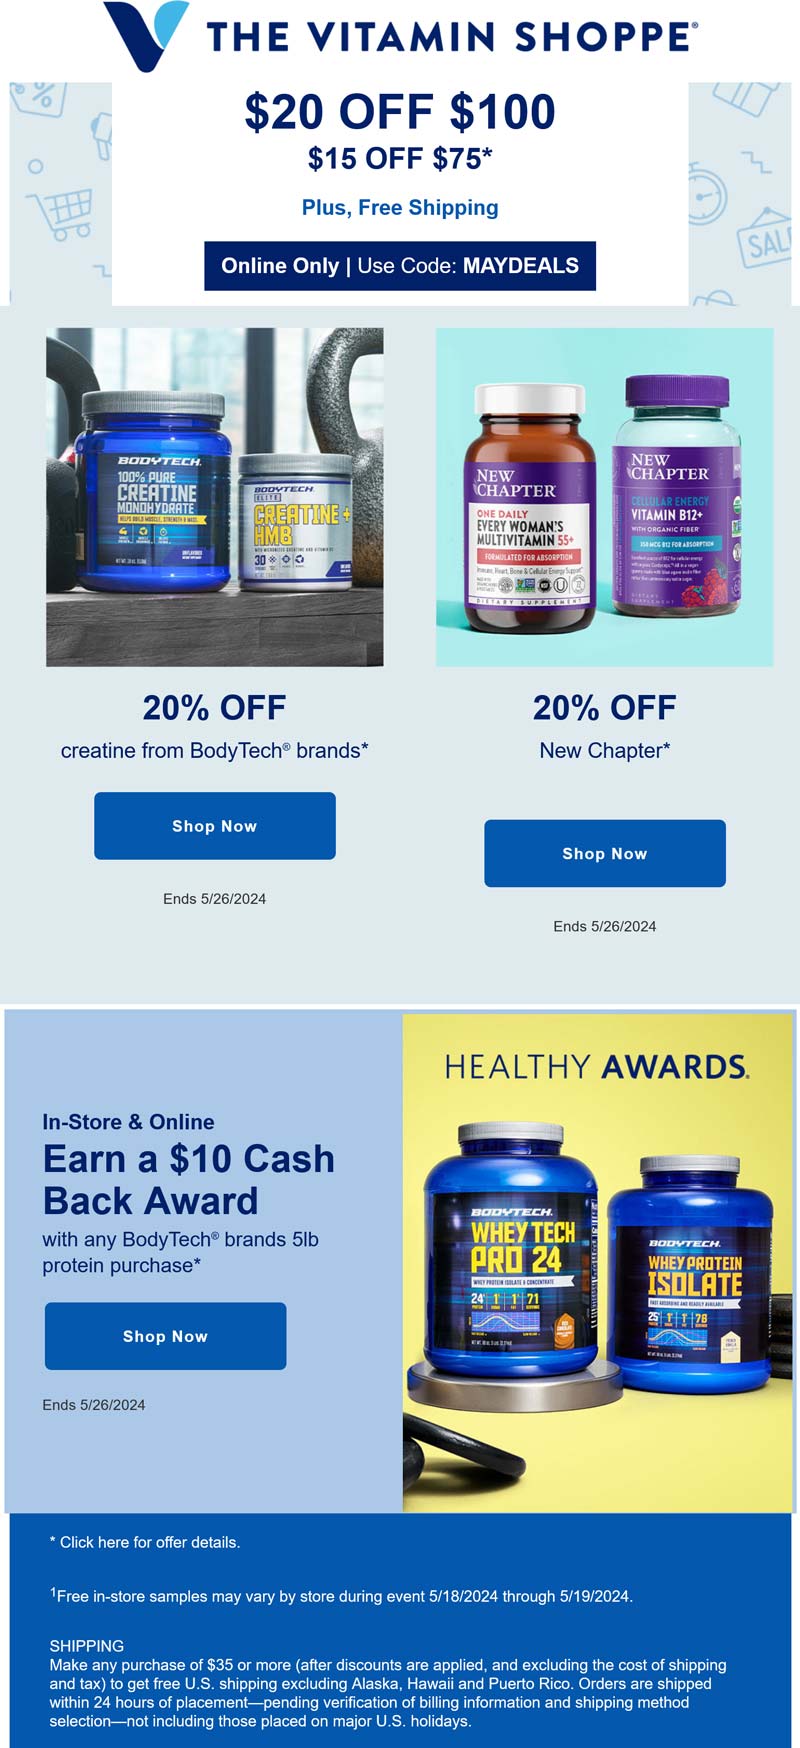 The Vitamin Shoppe stores Coupon  $15-$20 off $75+ online at The Vitamin Shoppe via promo code MAYDEALS #thevitaminshoppe 